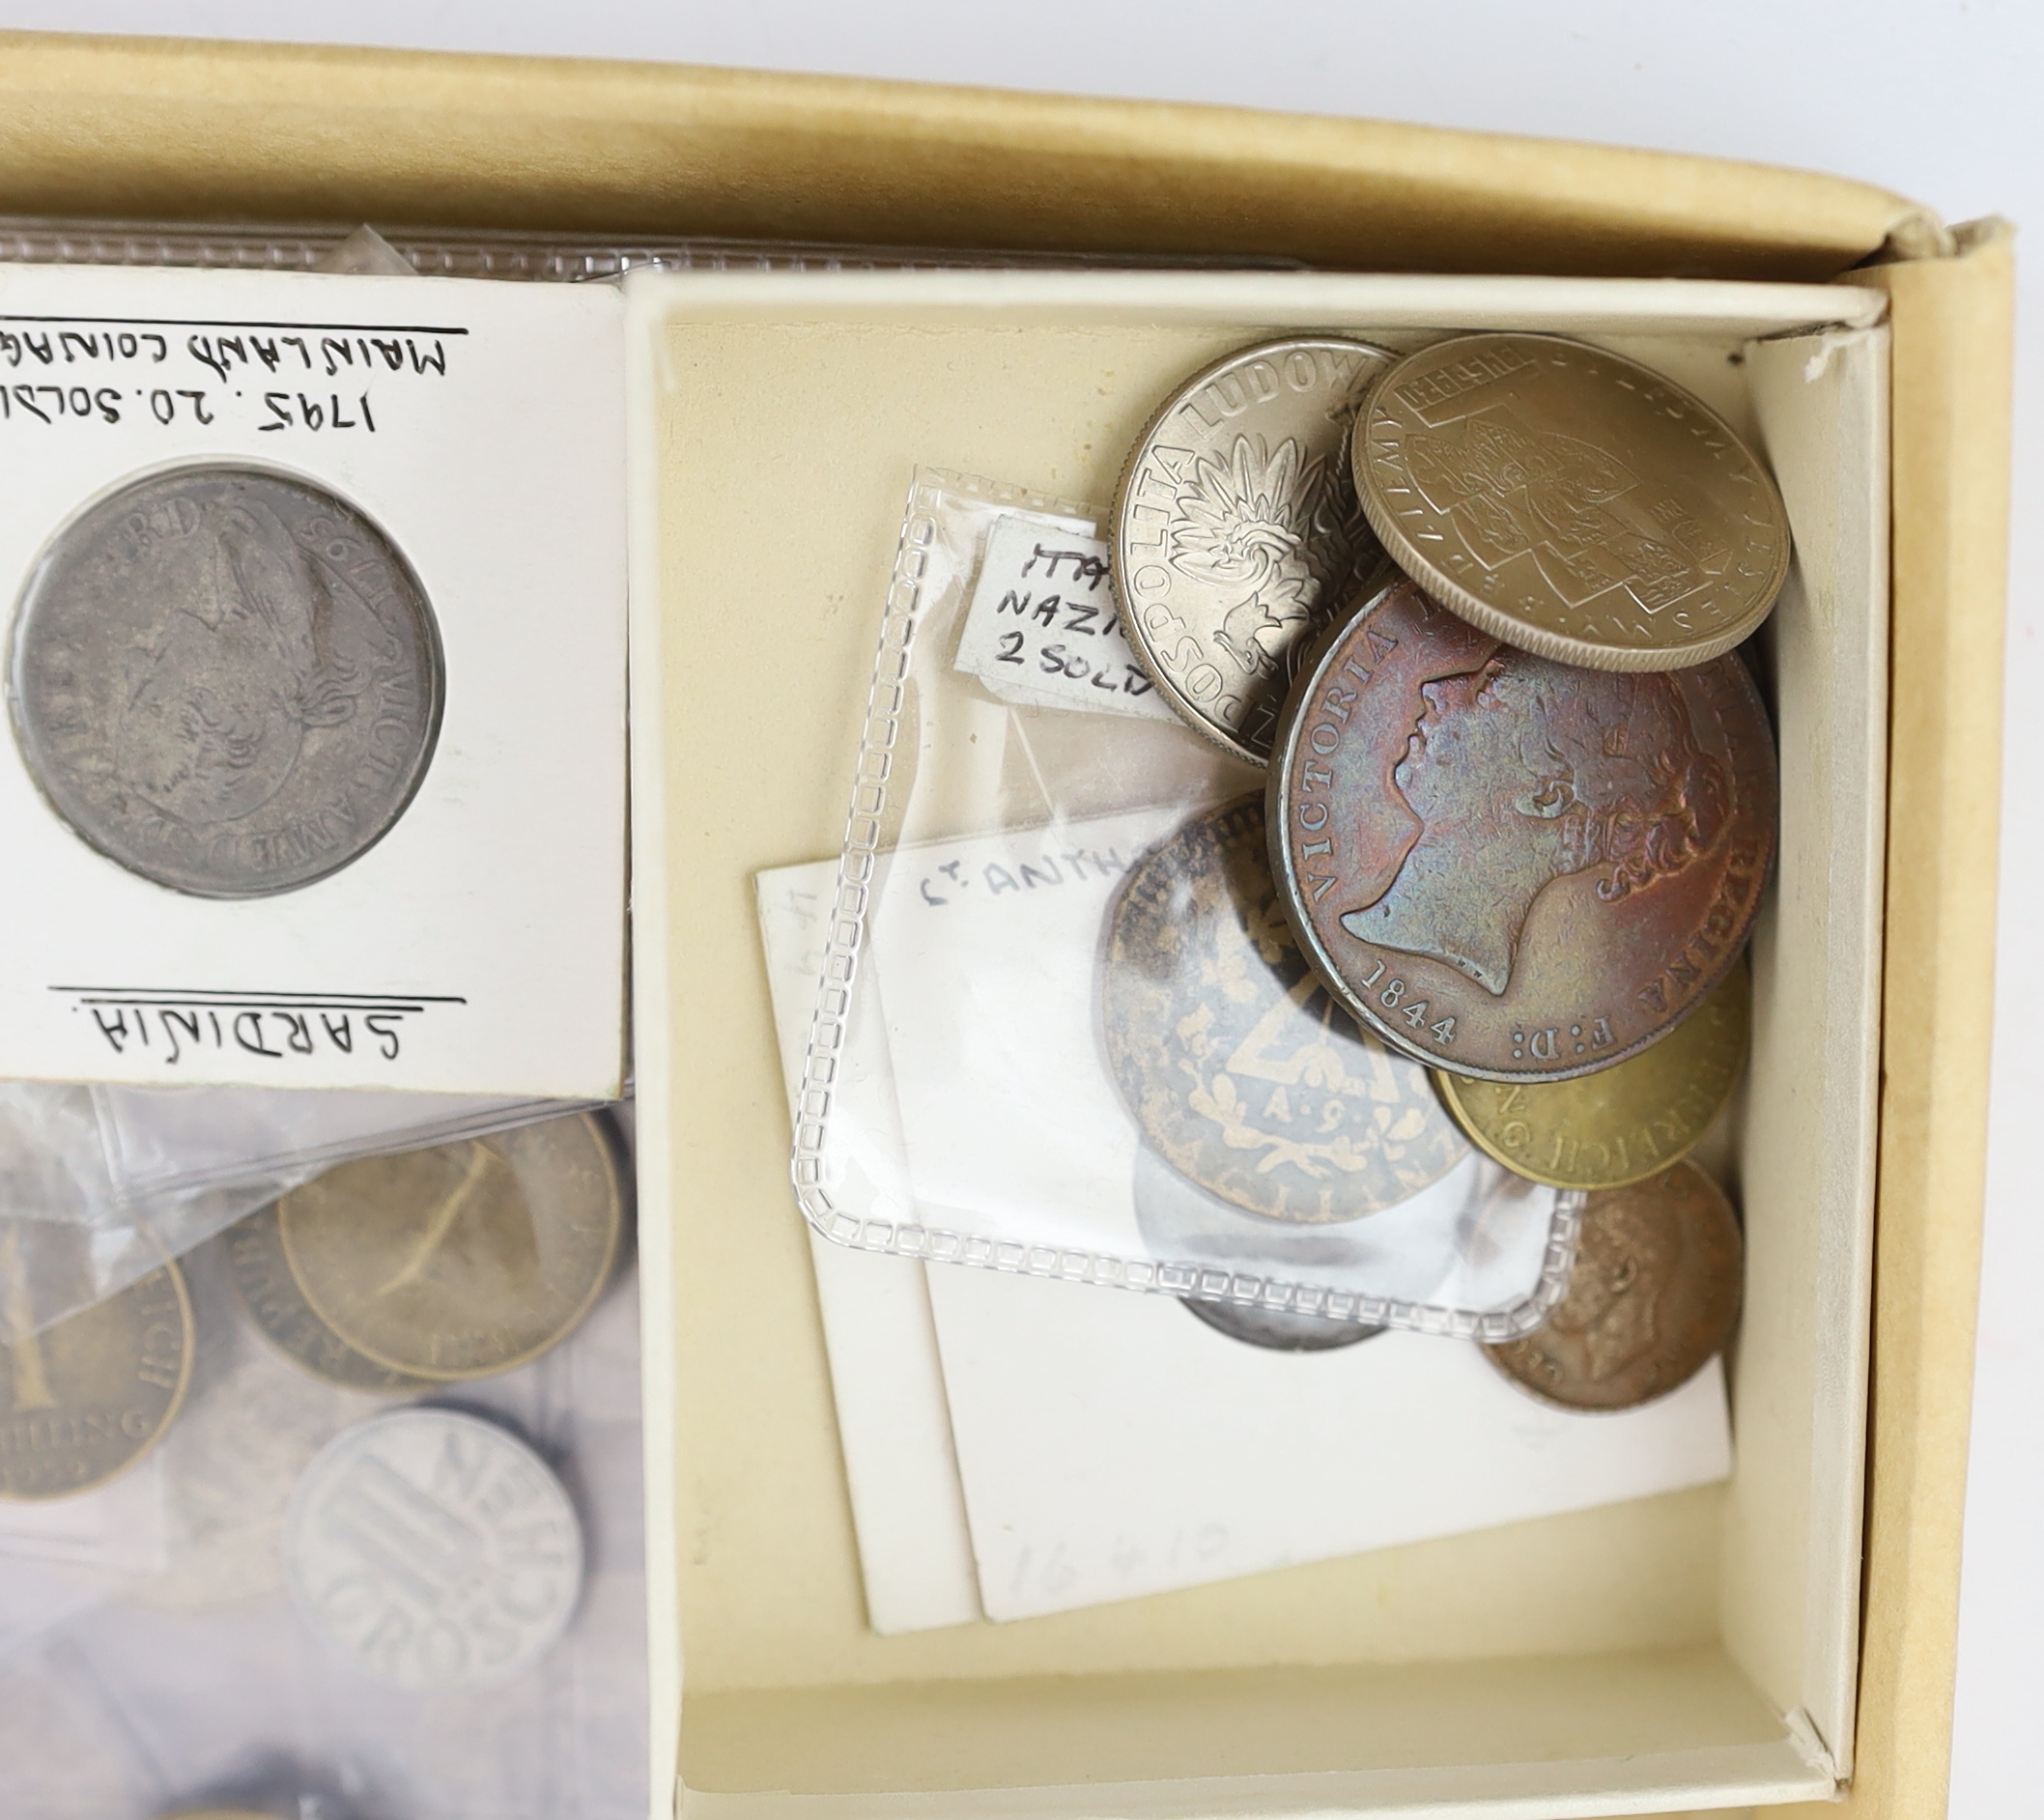 British and World coins, including a collection of Edward VI to George VI halfcrowns